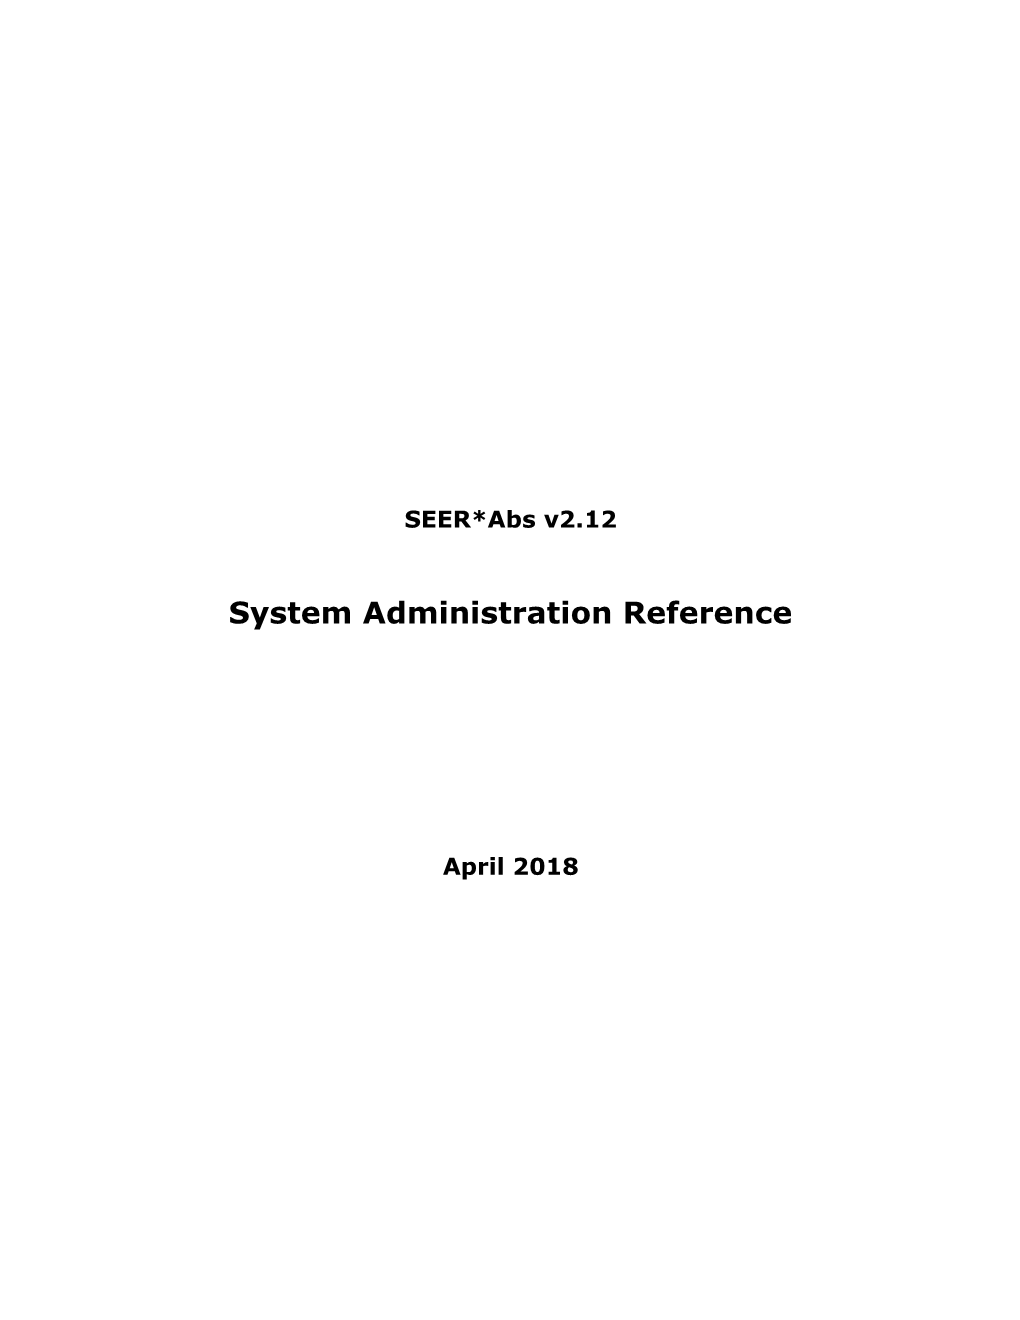 SEER*Abs System Administration Reference